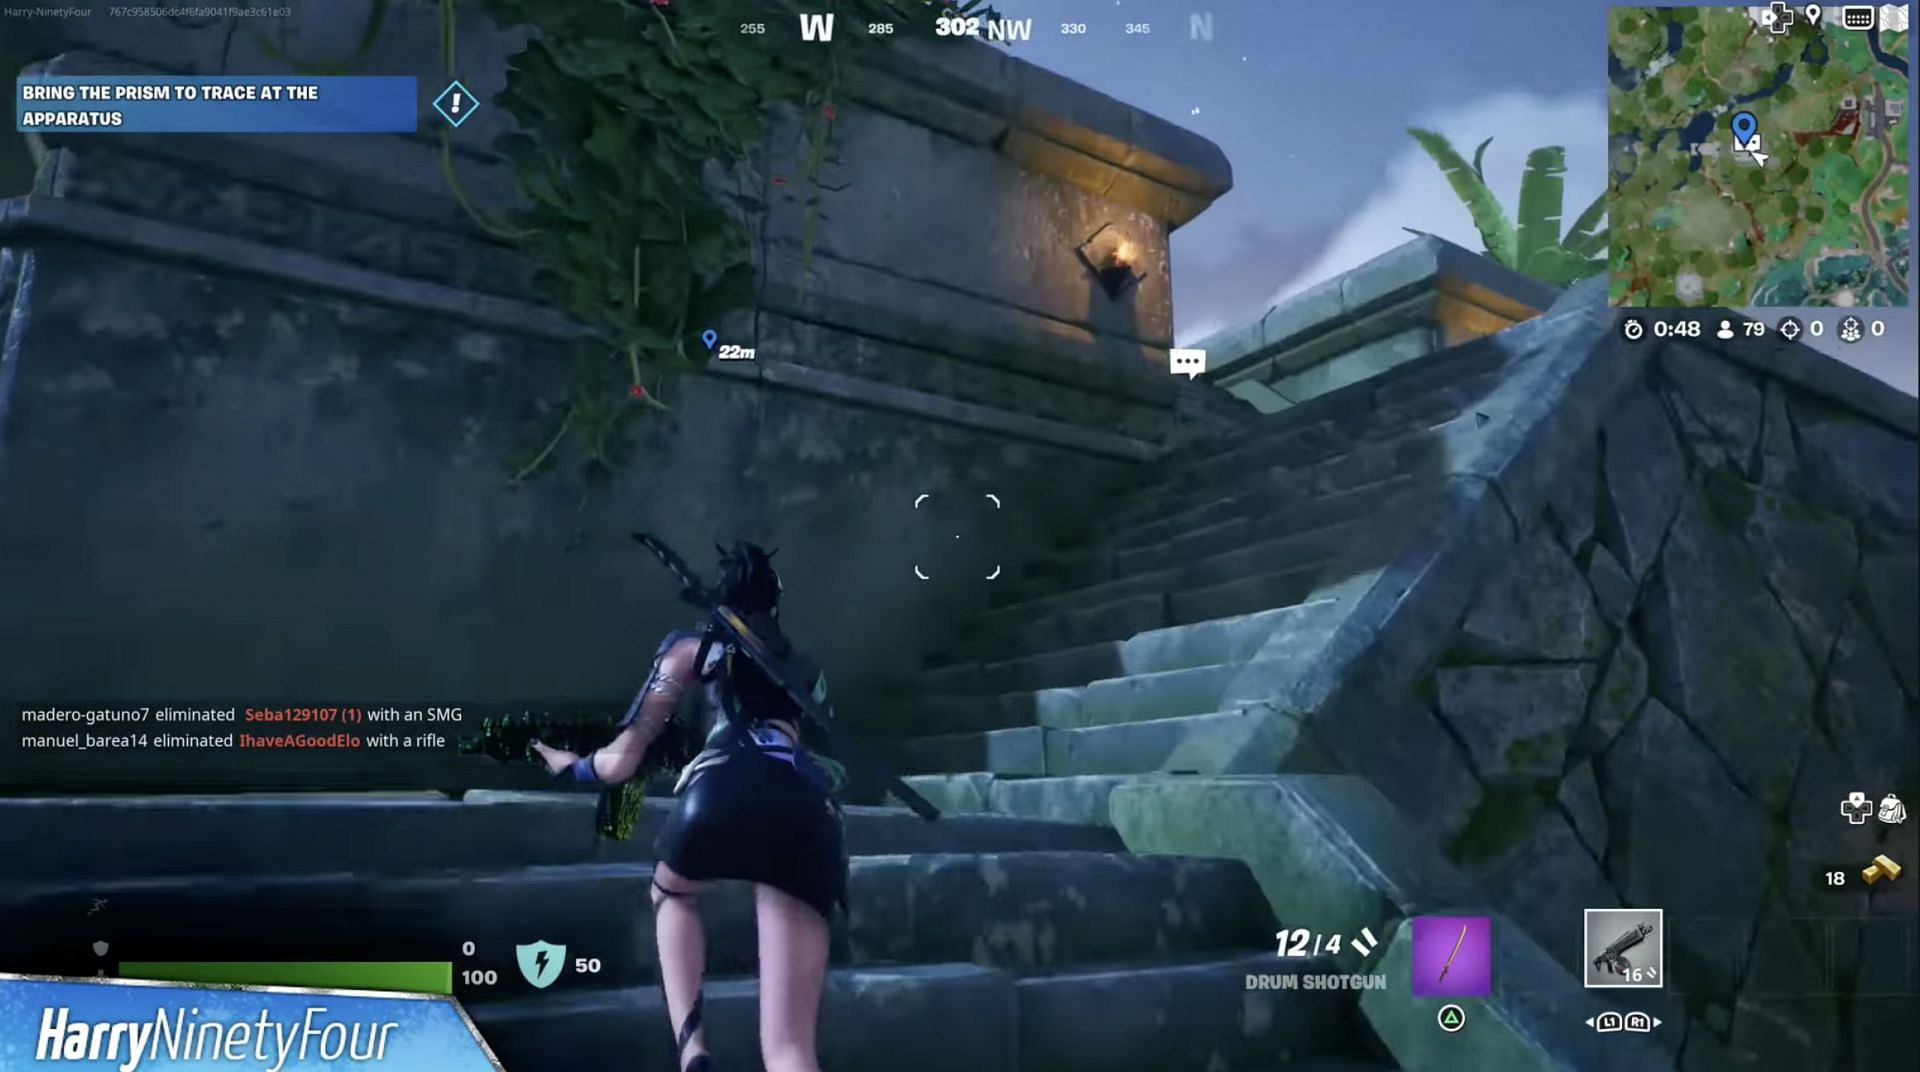 Head up the stairs with the Prism (Image via HarryNinetyFour on YouTube)